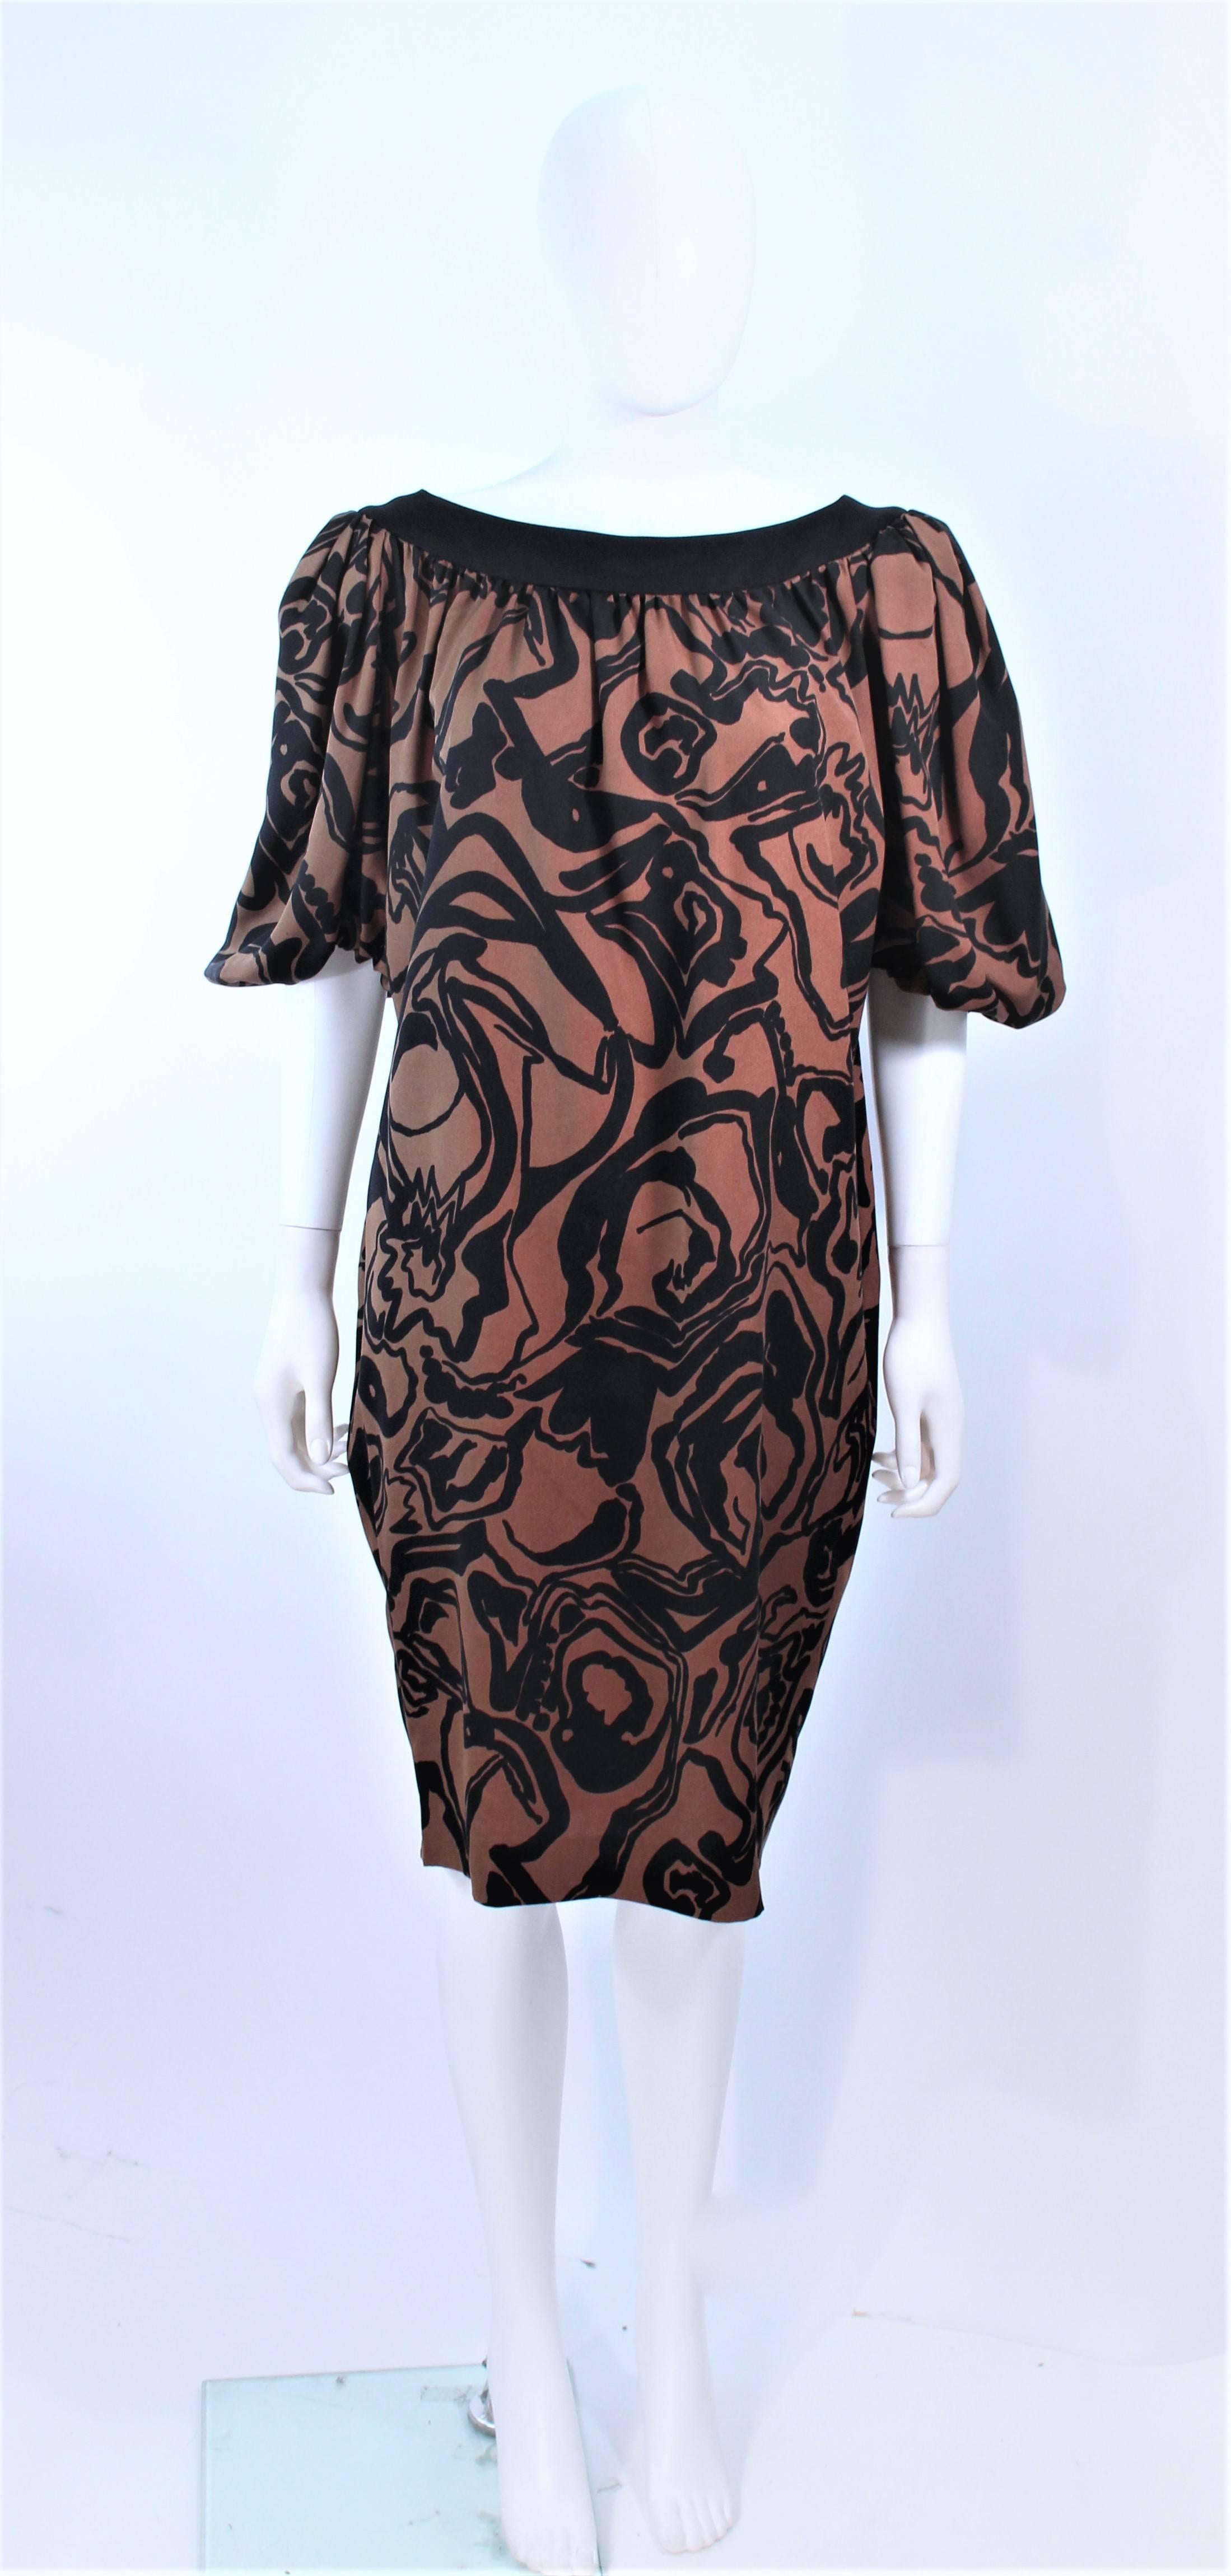 This Yves Saint Laurent dress is composed of a brown and black silk with an abstract floral pattern. Features large gathered puff sleeves. In excellent pre-owned condition.

**Please cross-reference measurements for personal accuracy. Size in